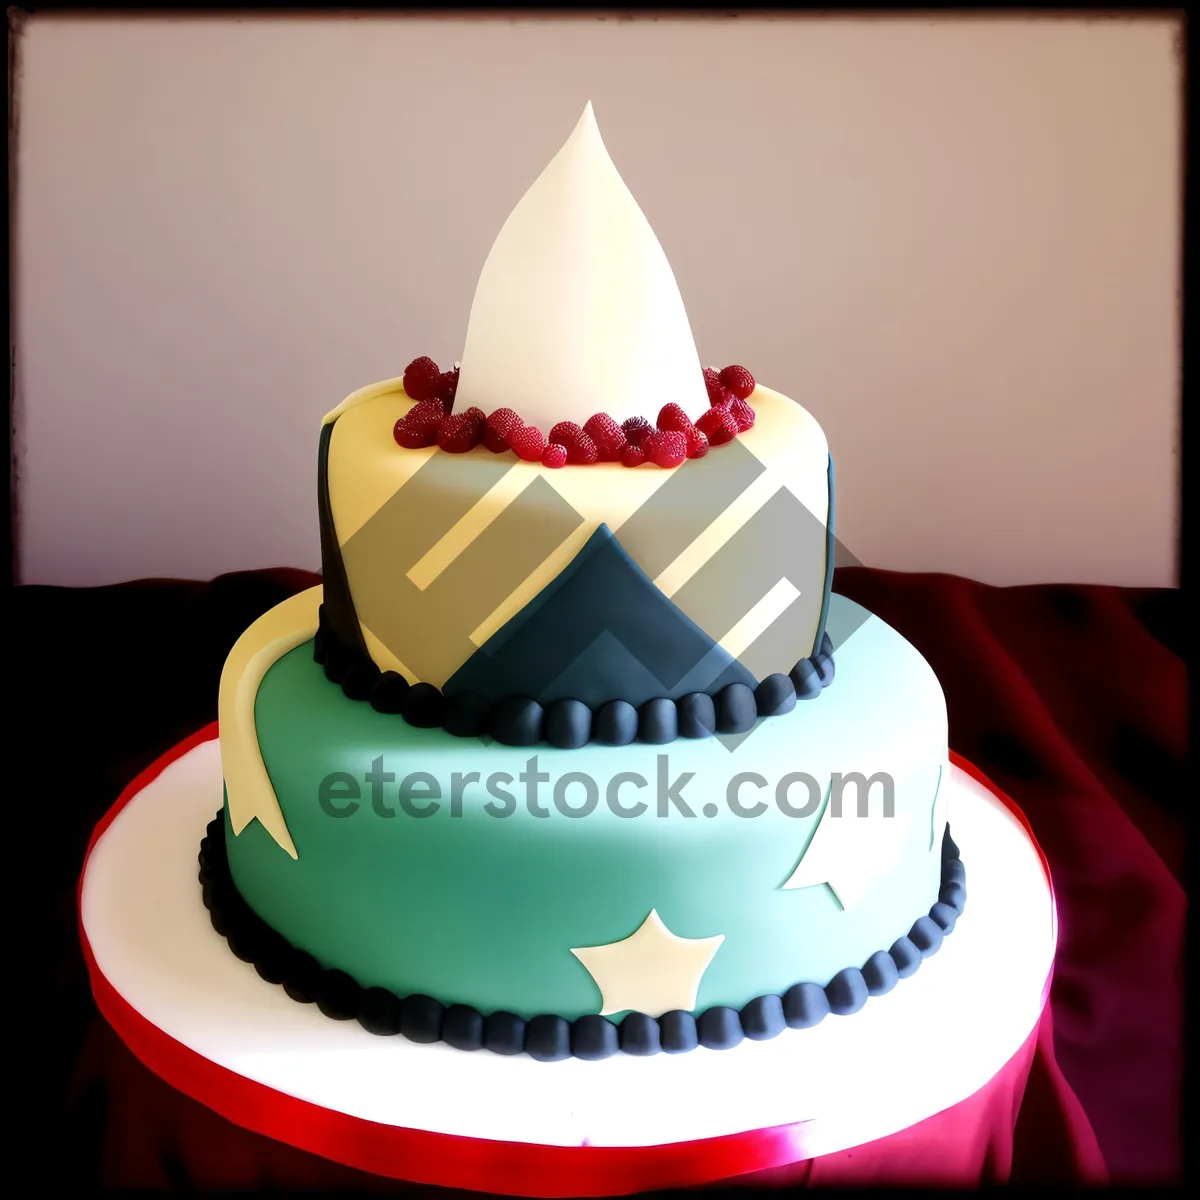 Picture of Decadent Chocolate Cake with Candle: A Special Celebration